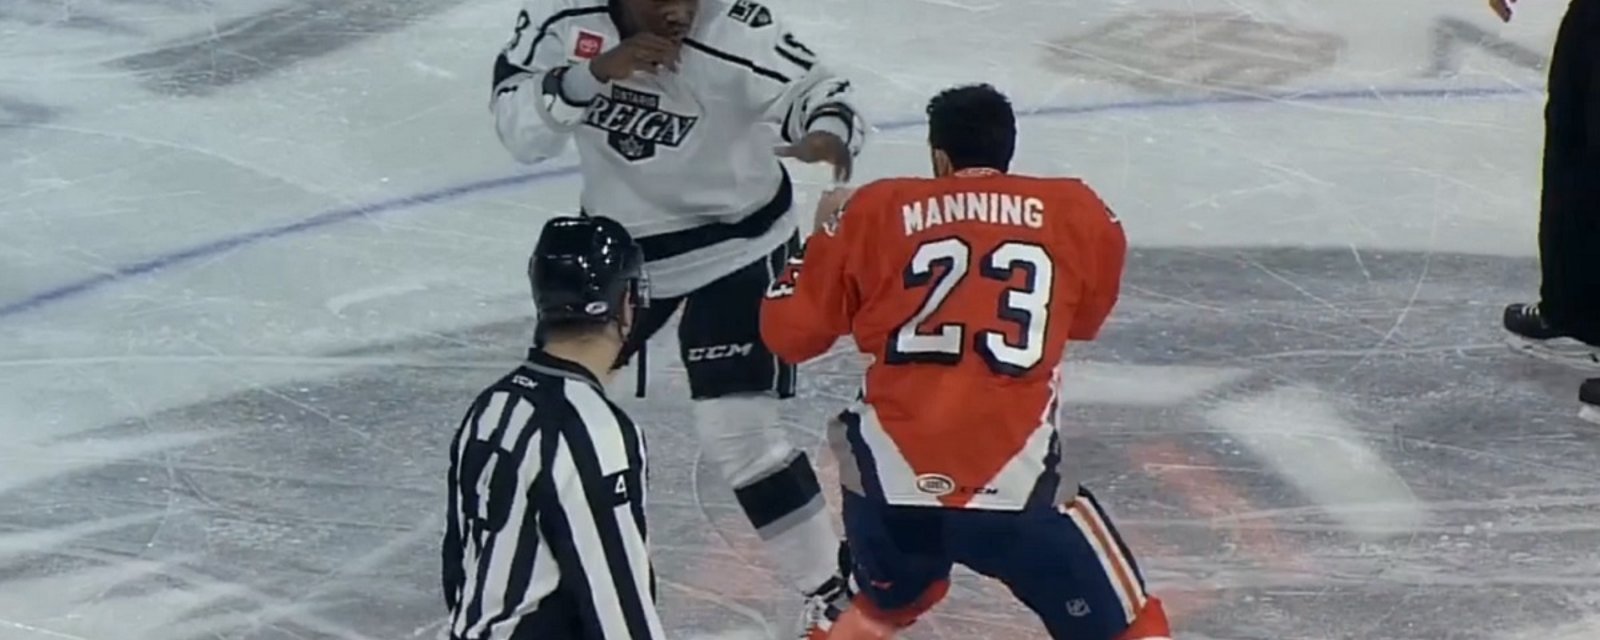 Boko Imama drops the gloves with Brandon Manning in 1st game since Manning was suspended for a racial slur.